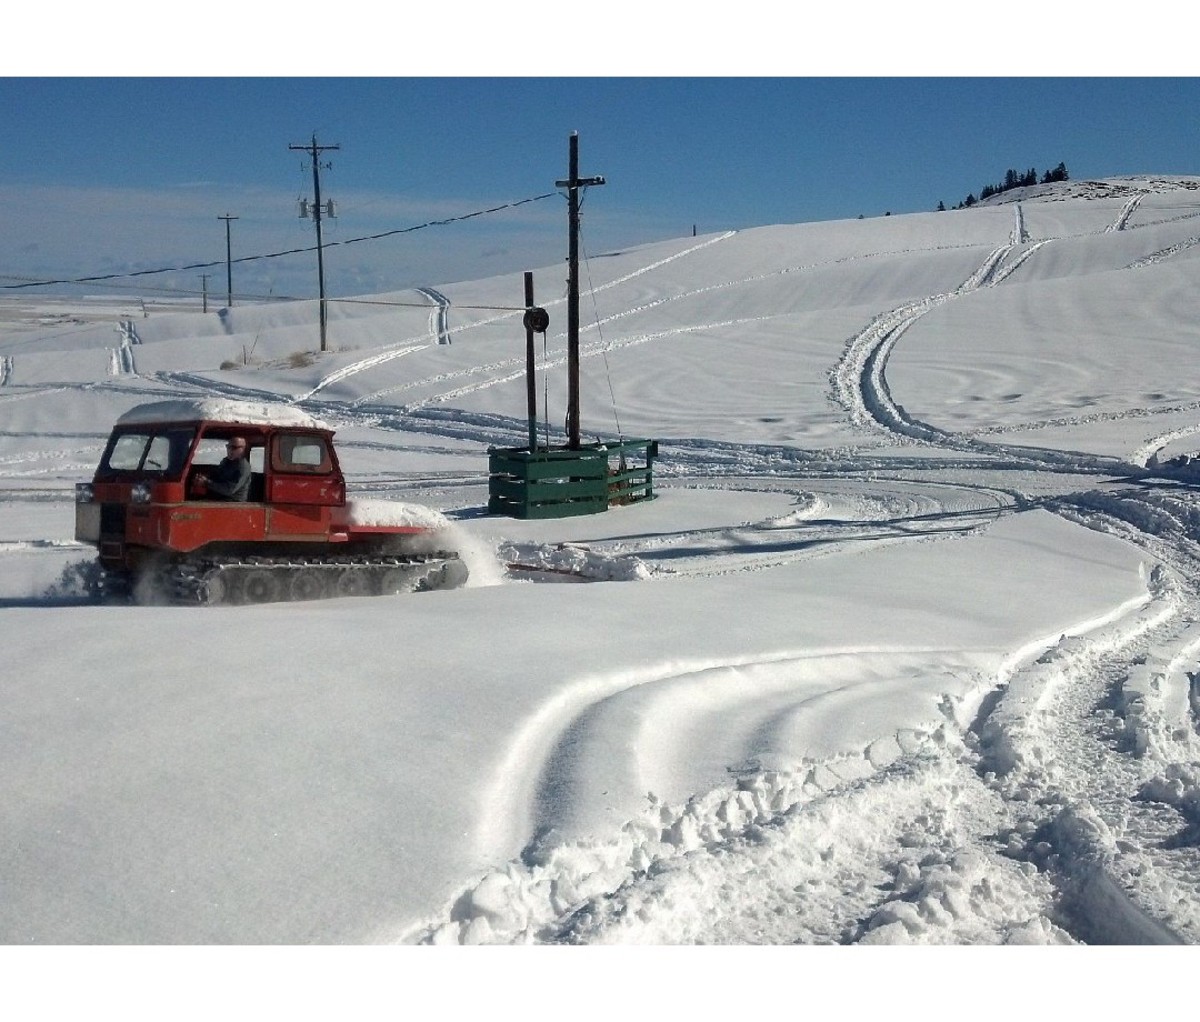 Old-school snow cat grooming the hill at Badger Mountain Ski Area: Waterville, WA